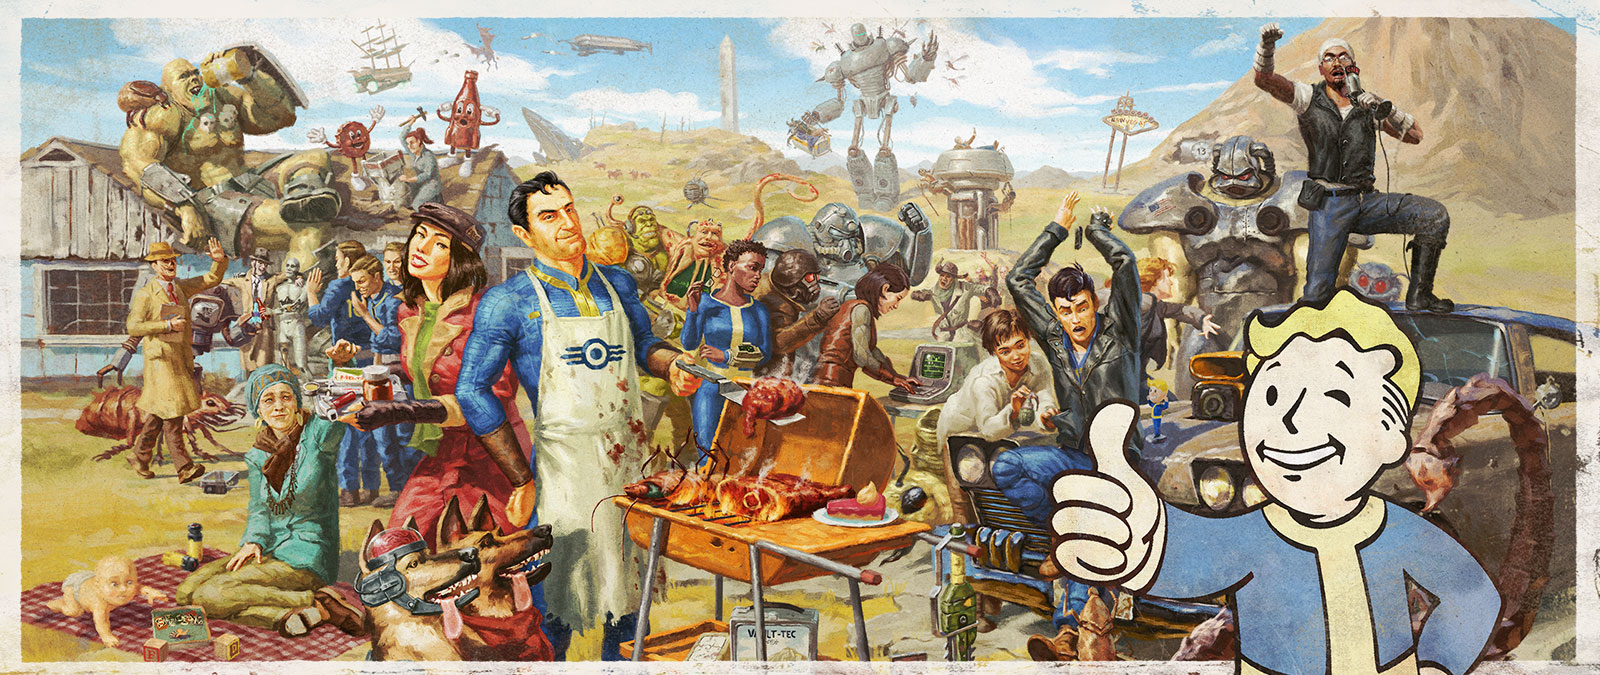 An assortment of characters from the Fallout franchise gather for a wholesome family barbecue.